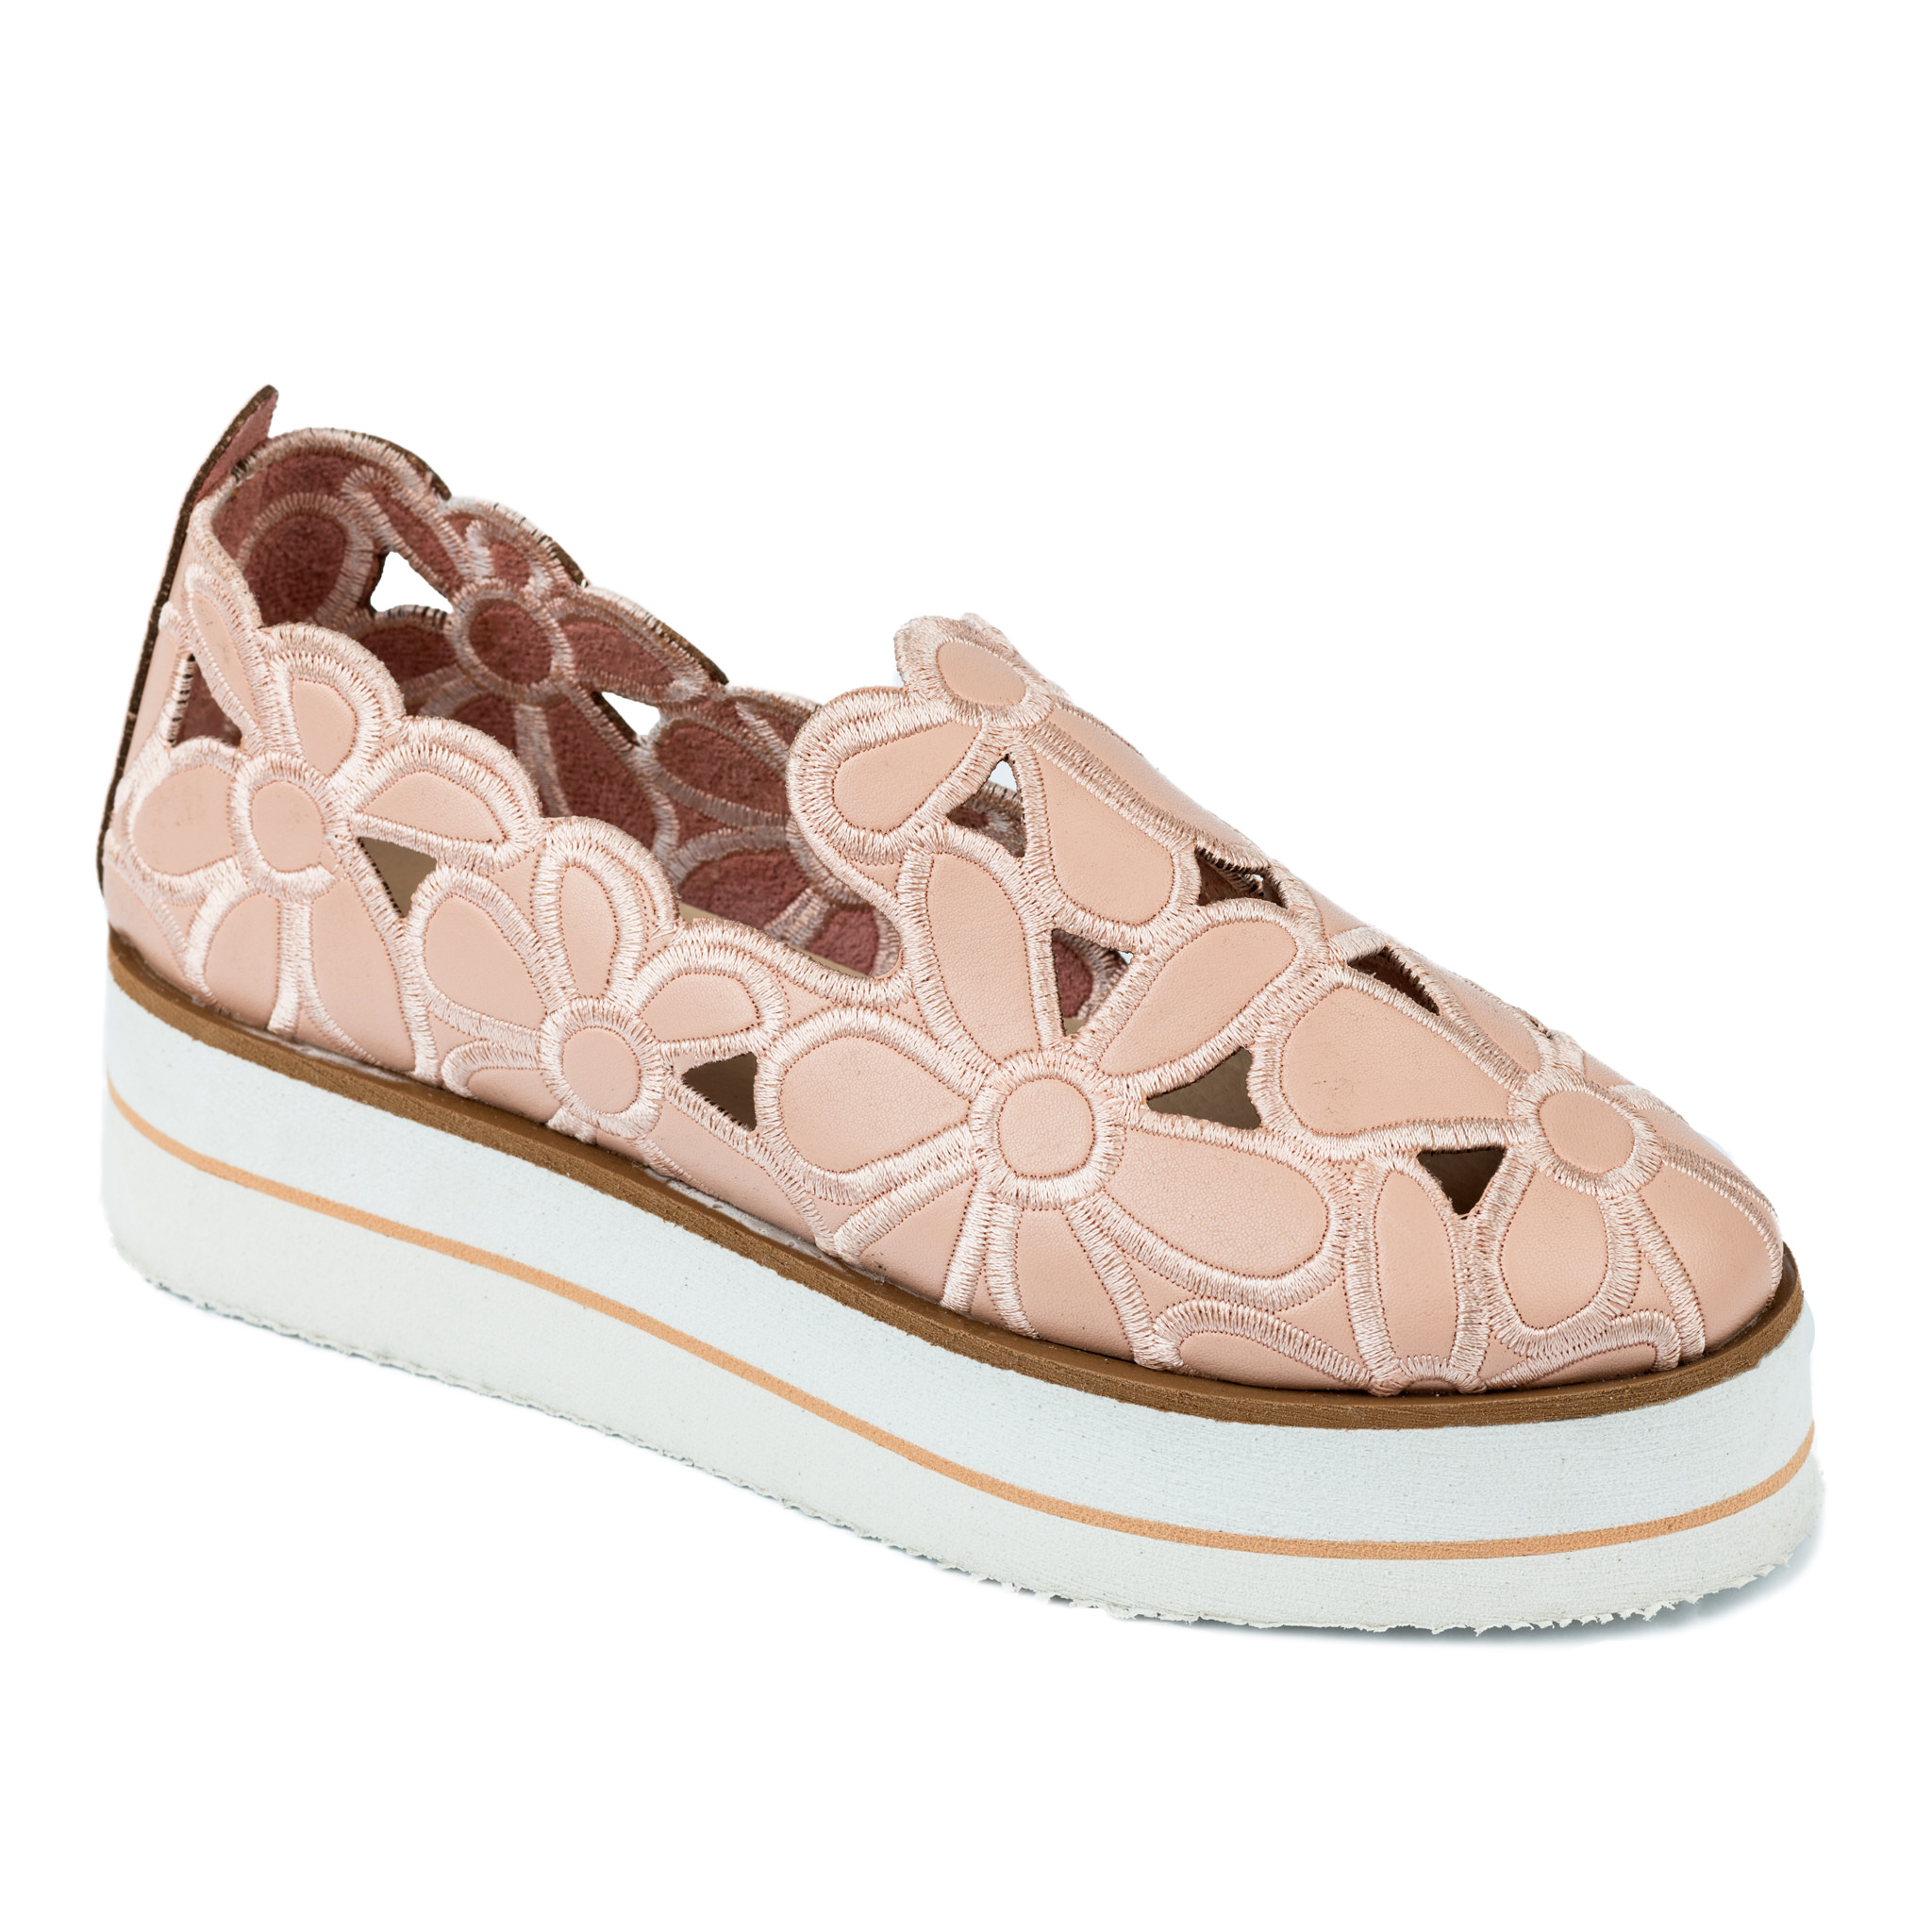 SHOES WITH HIGH SOLE AND FLOWER PRINT - ROSE